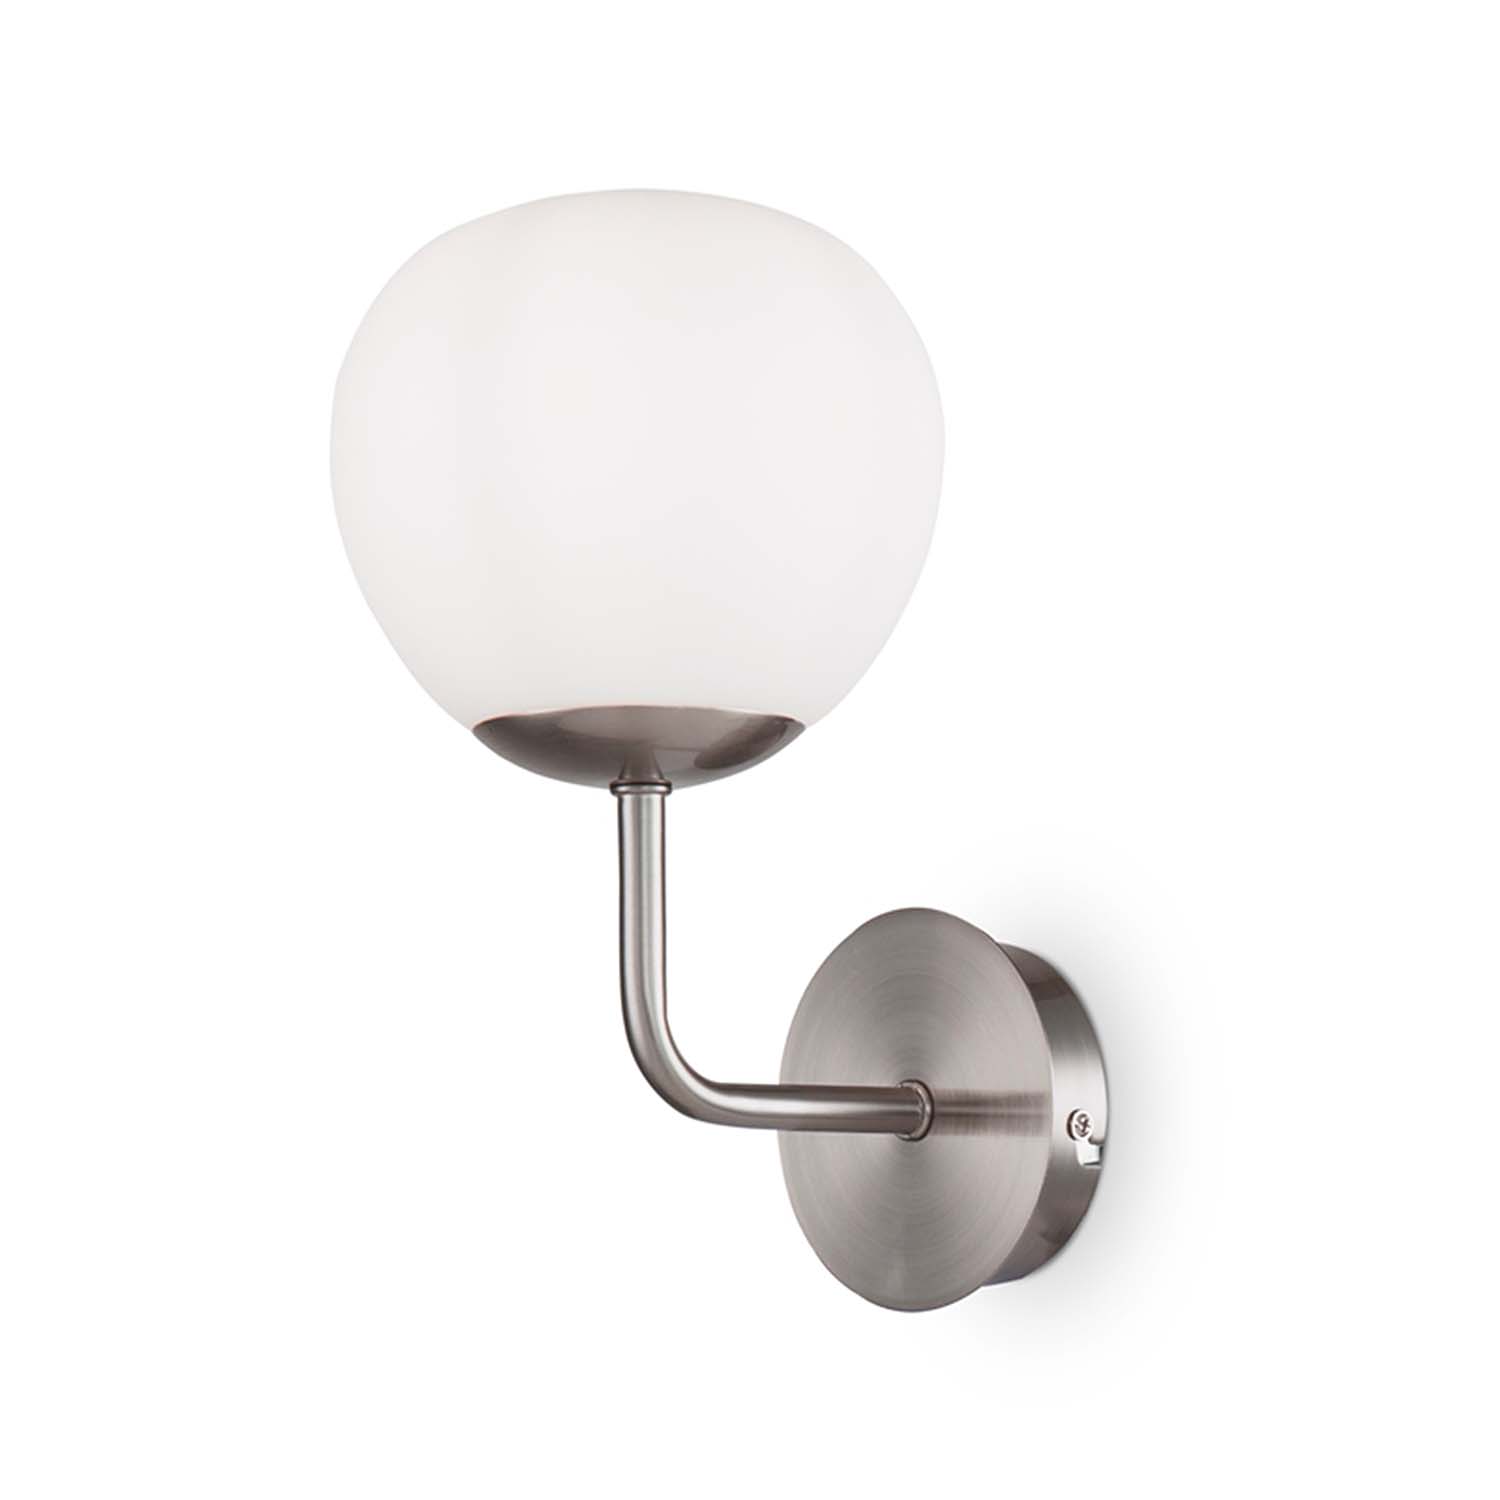 ERICH - Vintage wall light with glass ball